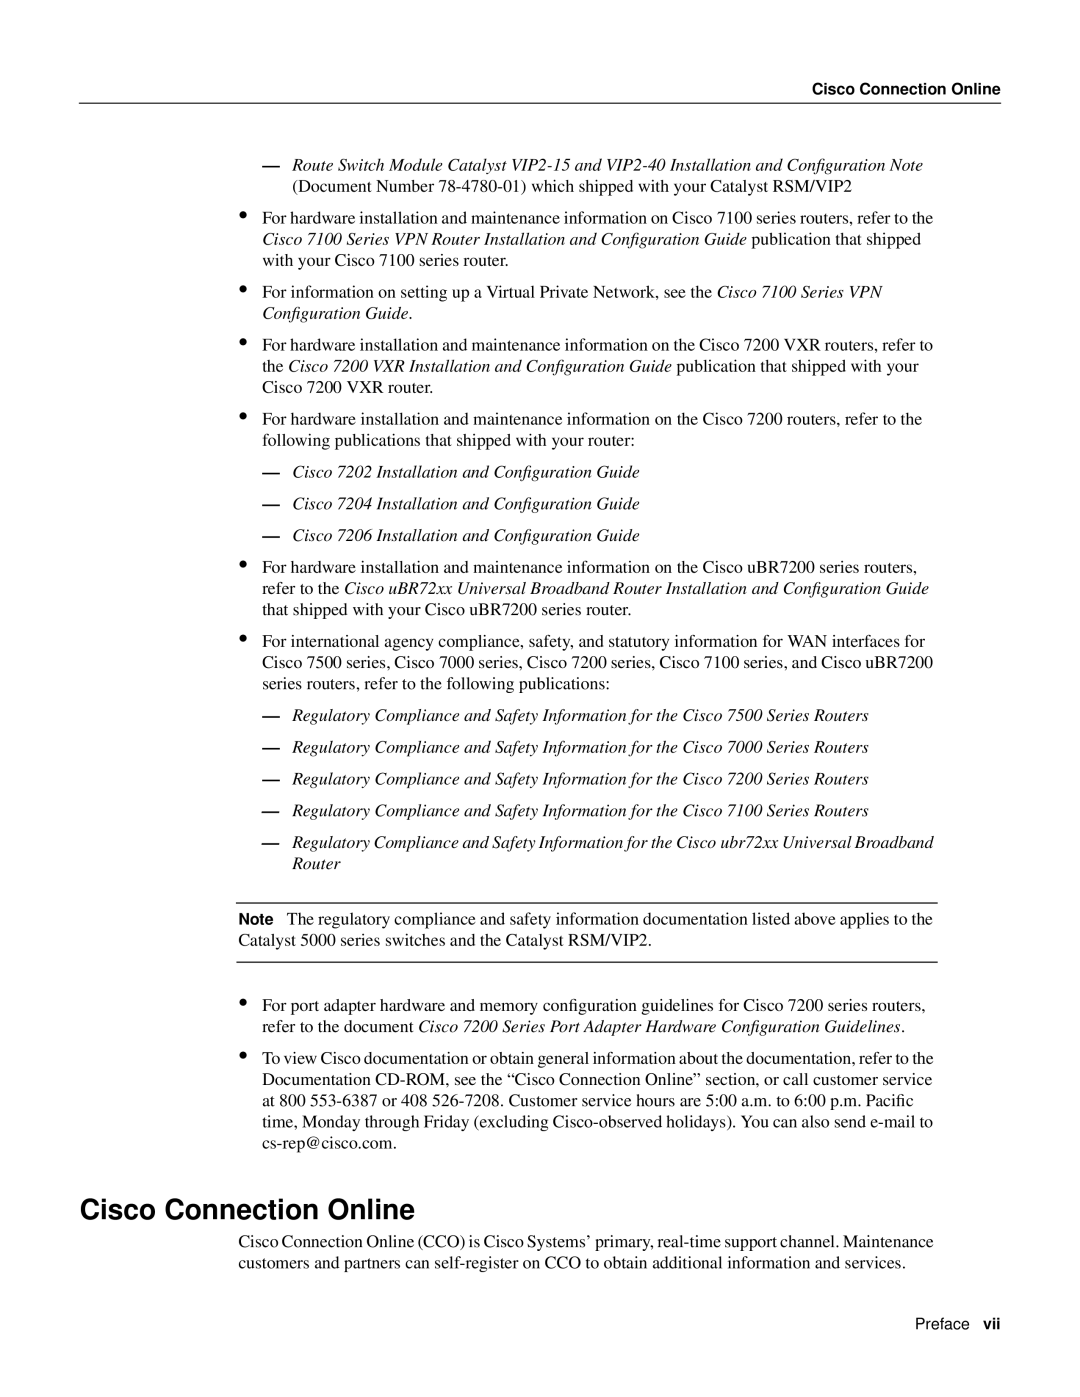 Cisco Systems PA-T3 manual Cisco Connection Online 